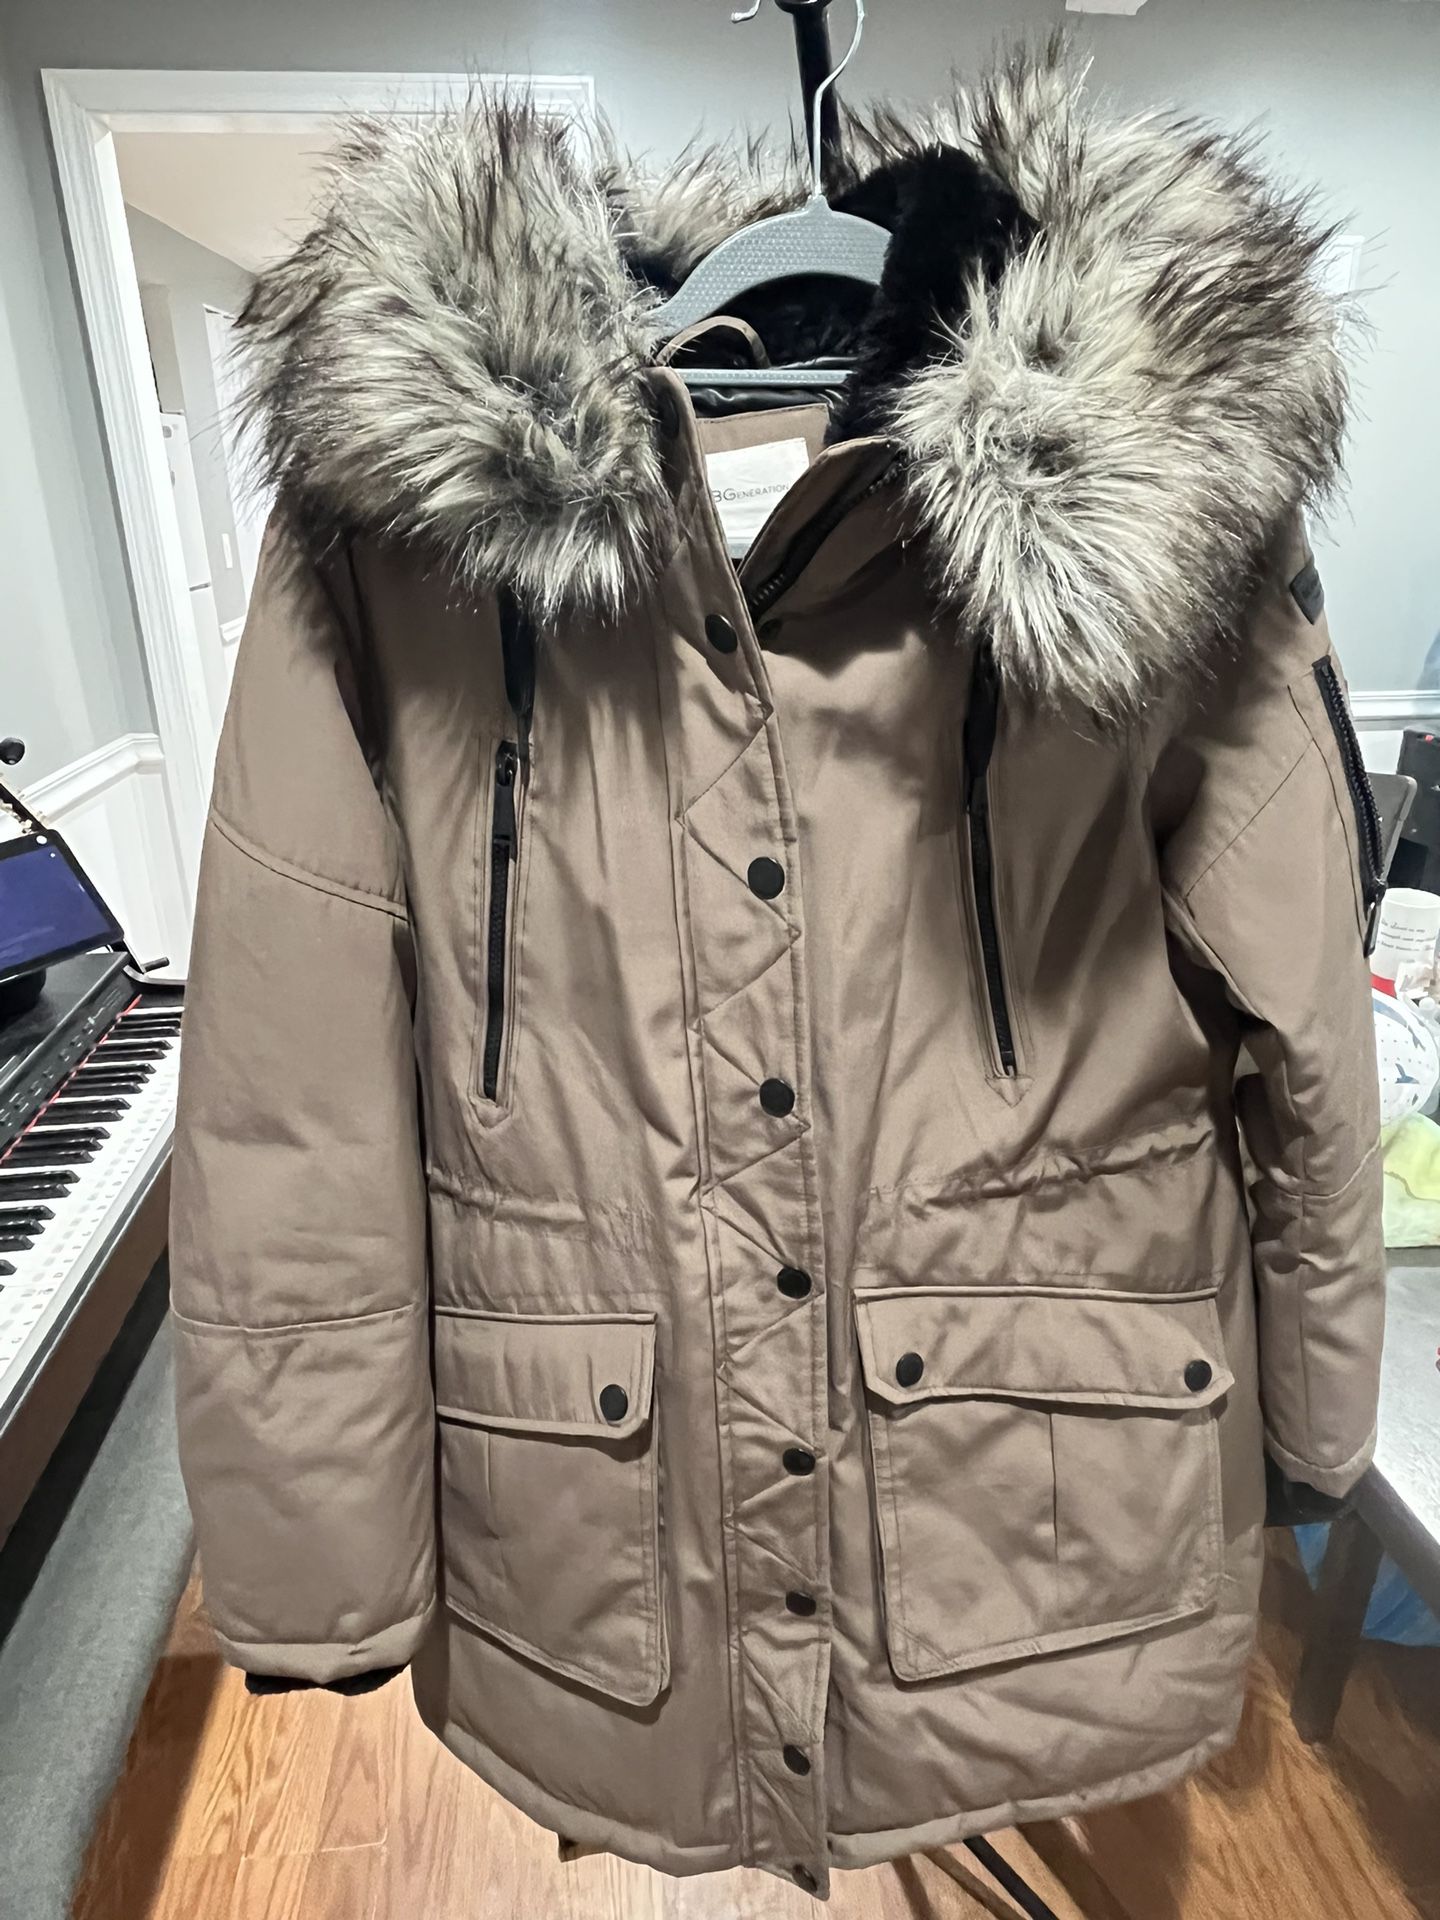 New Hooded Parka Jacket For Women (Large)